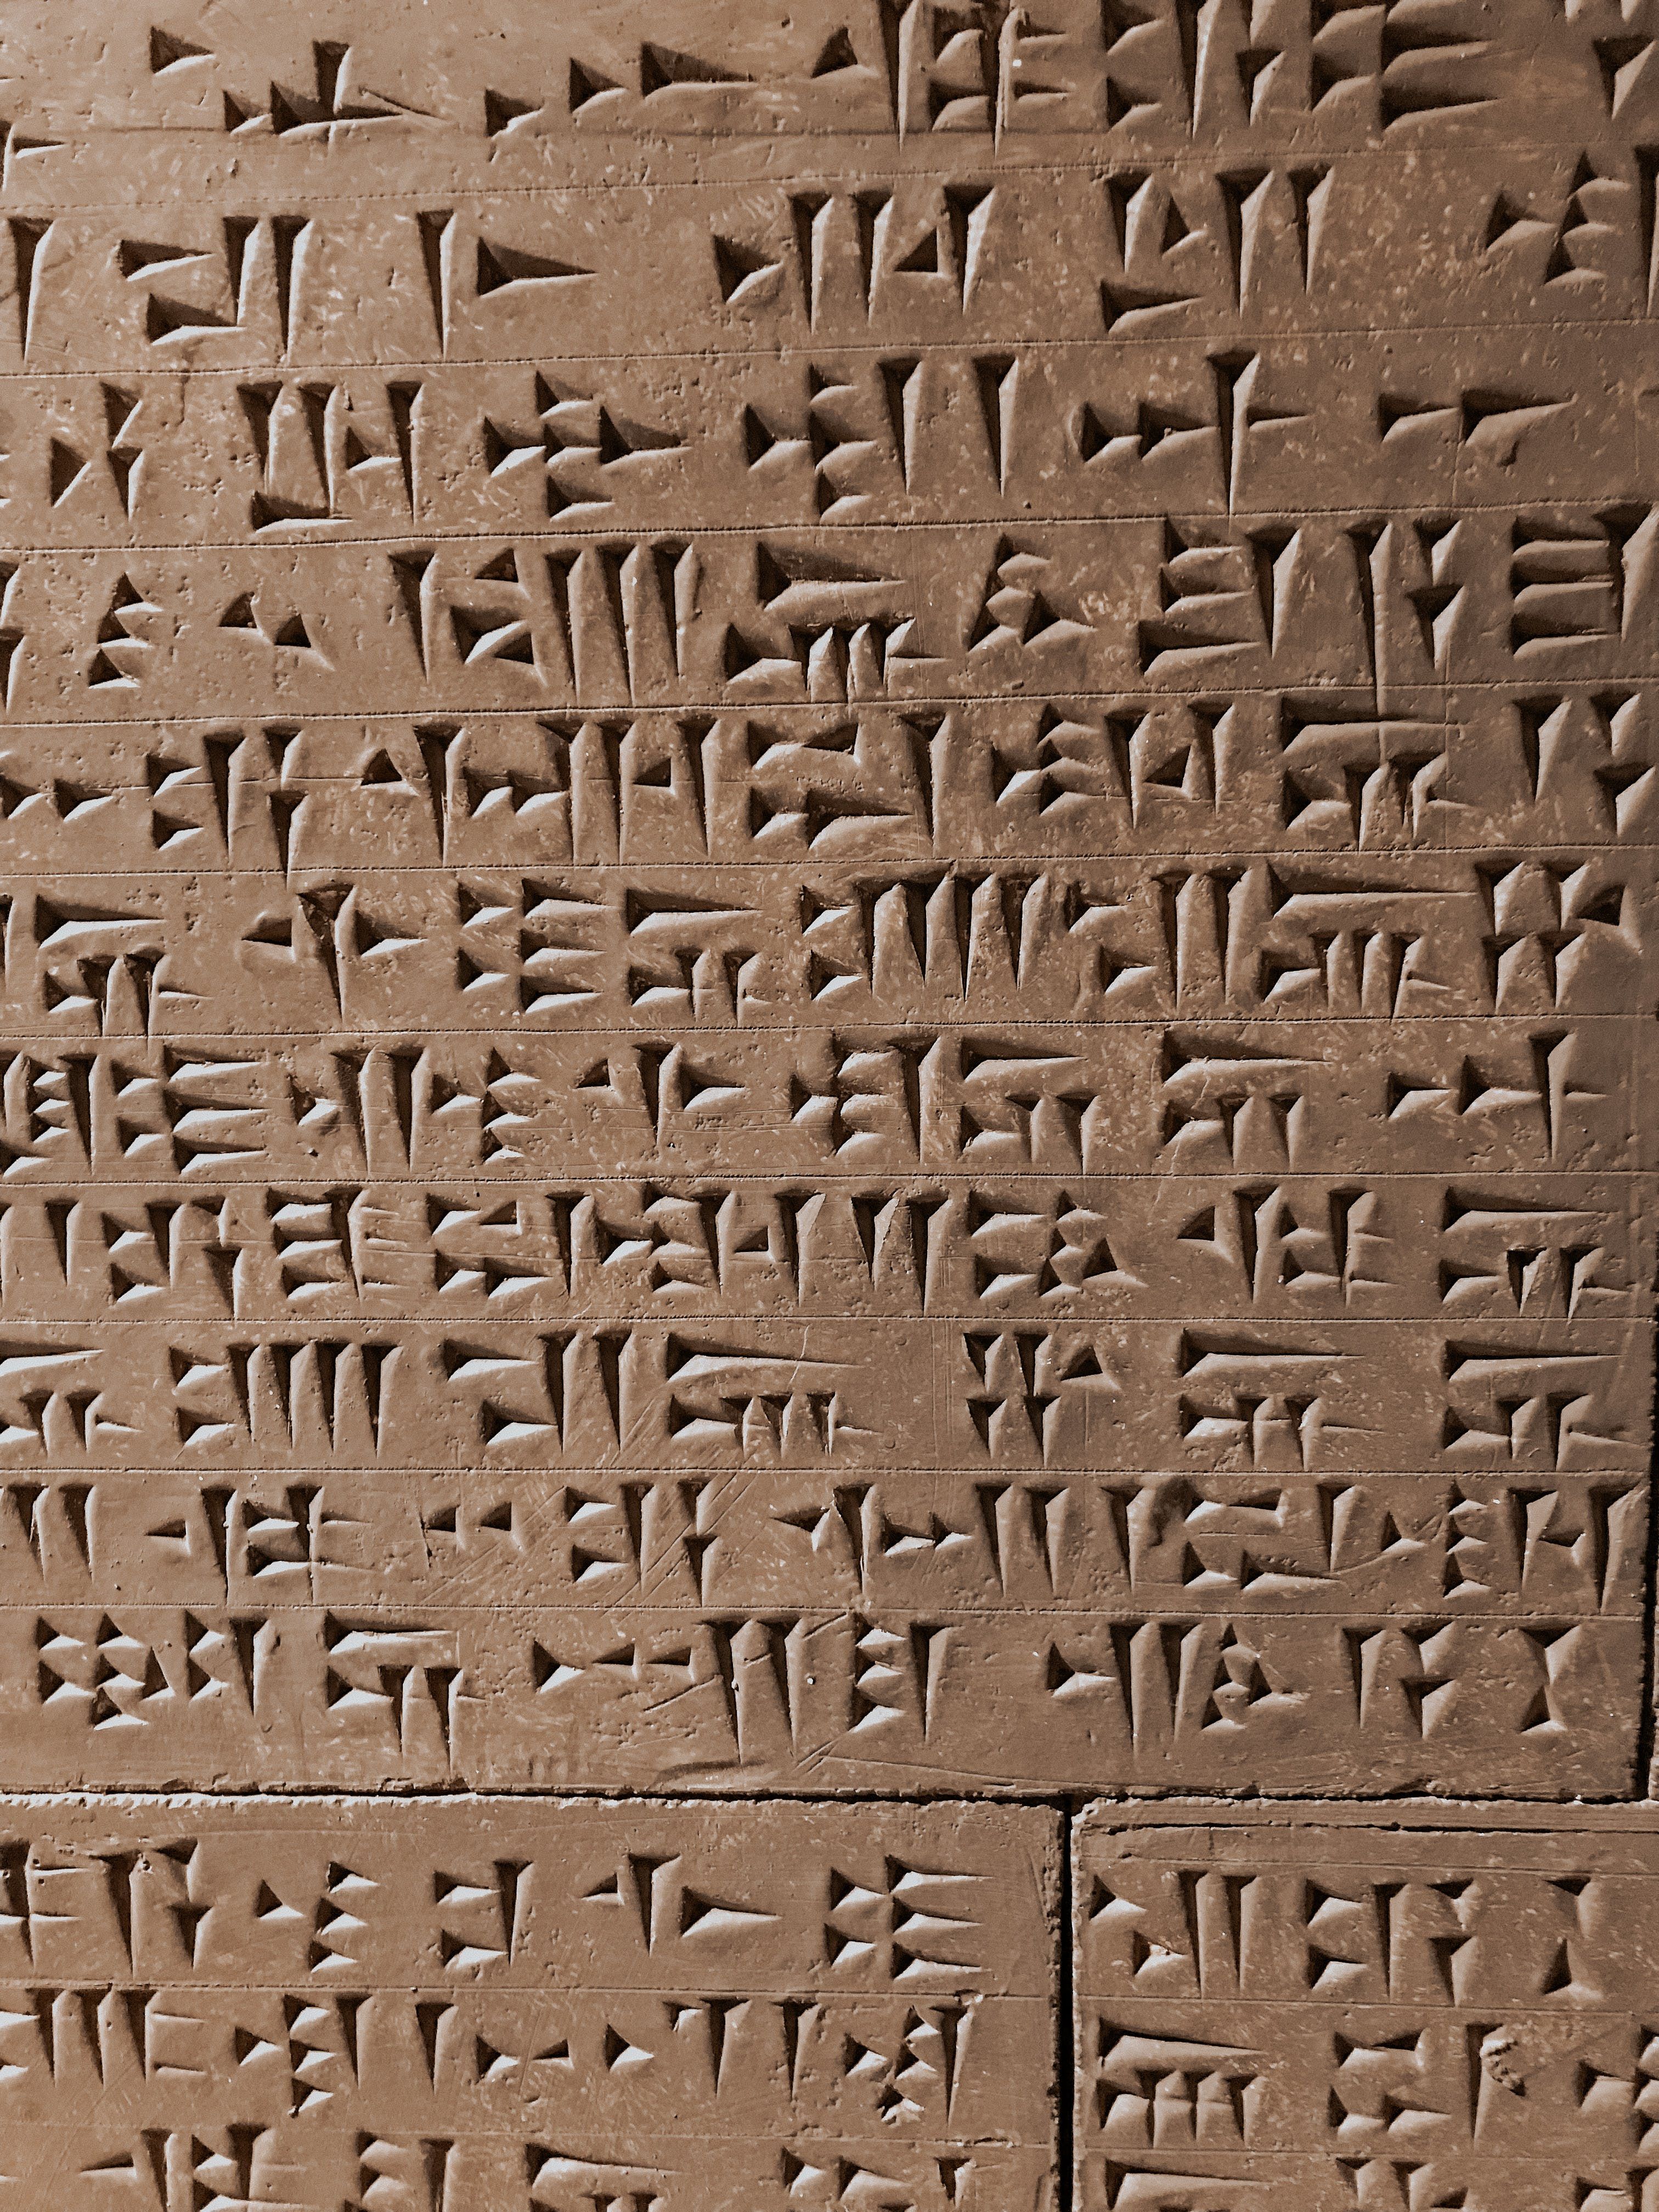 Example of ancient Cuneiform tablet